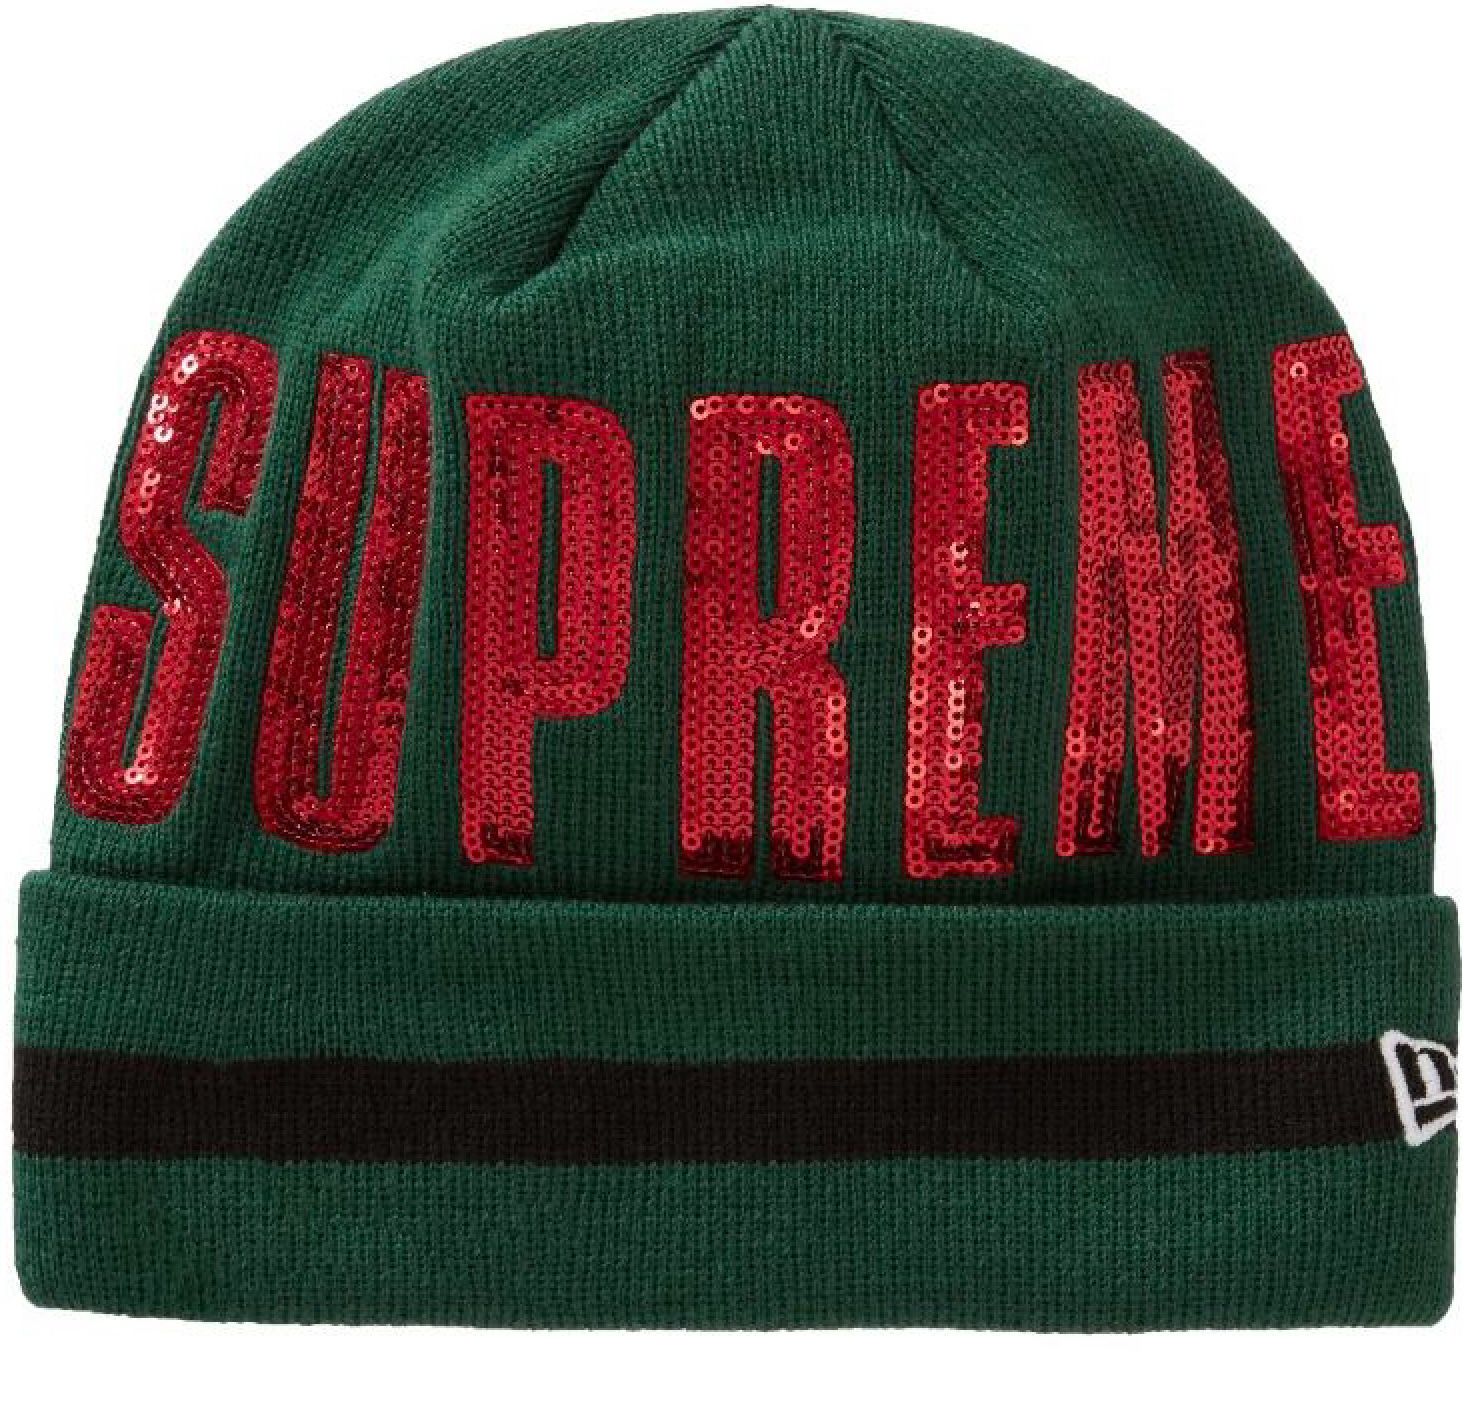 Supreme New Era Sequin Beanie / New In Packaging 